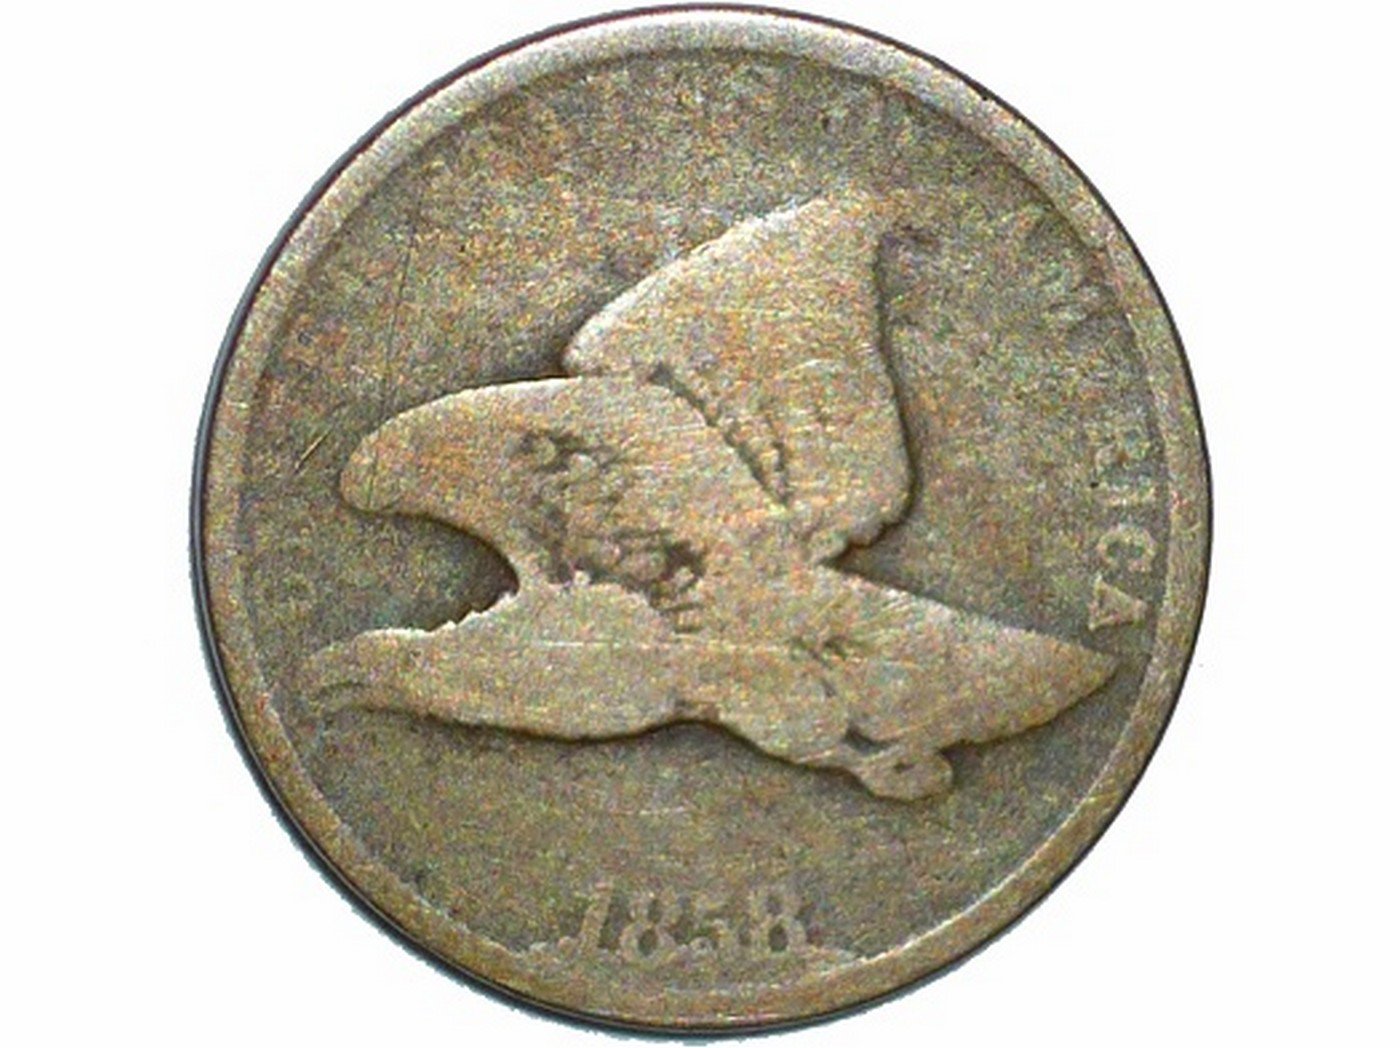 1858 CUD-007 - Flying Eagle Penny - Photo by David Poliquin